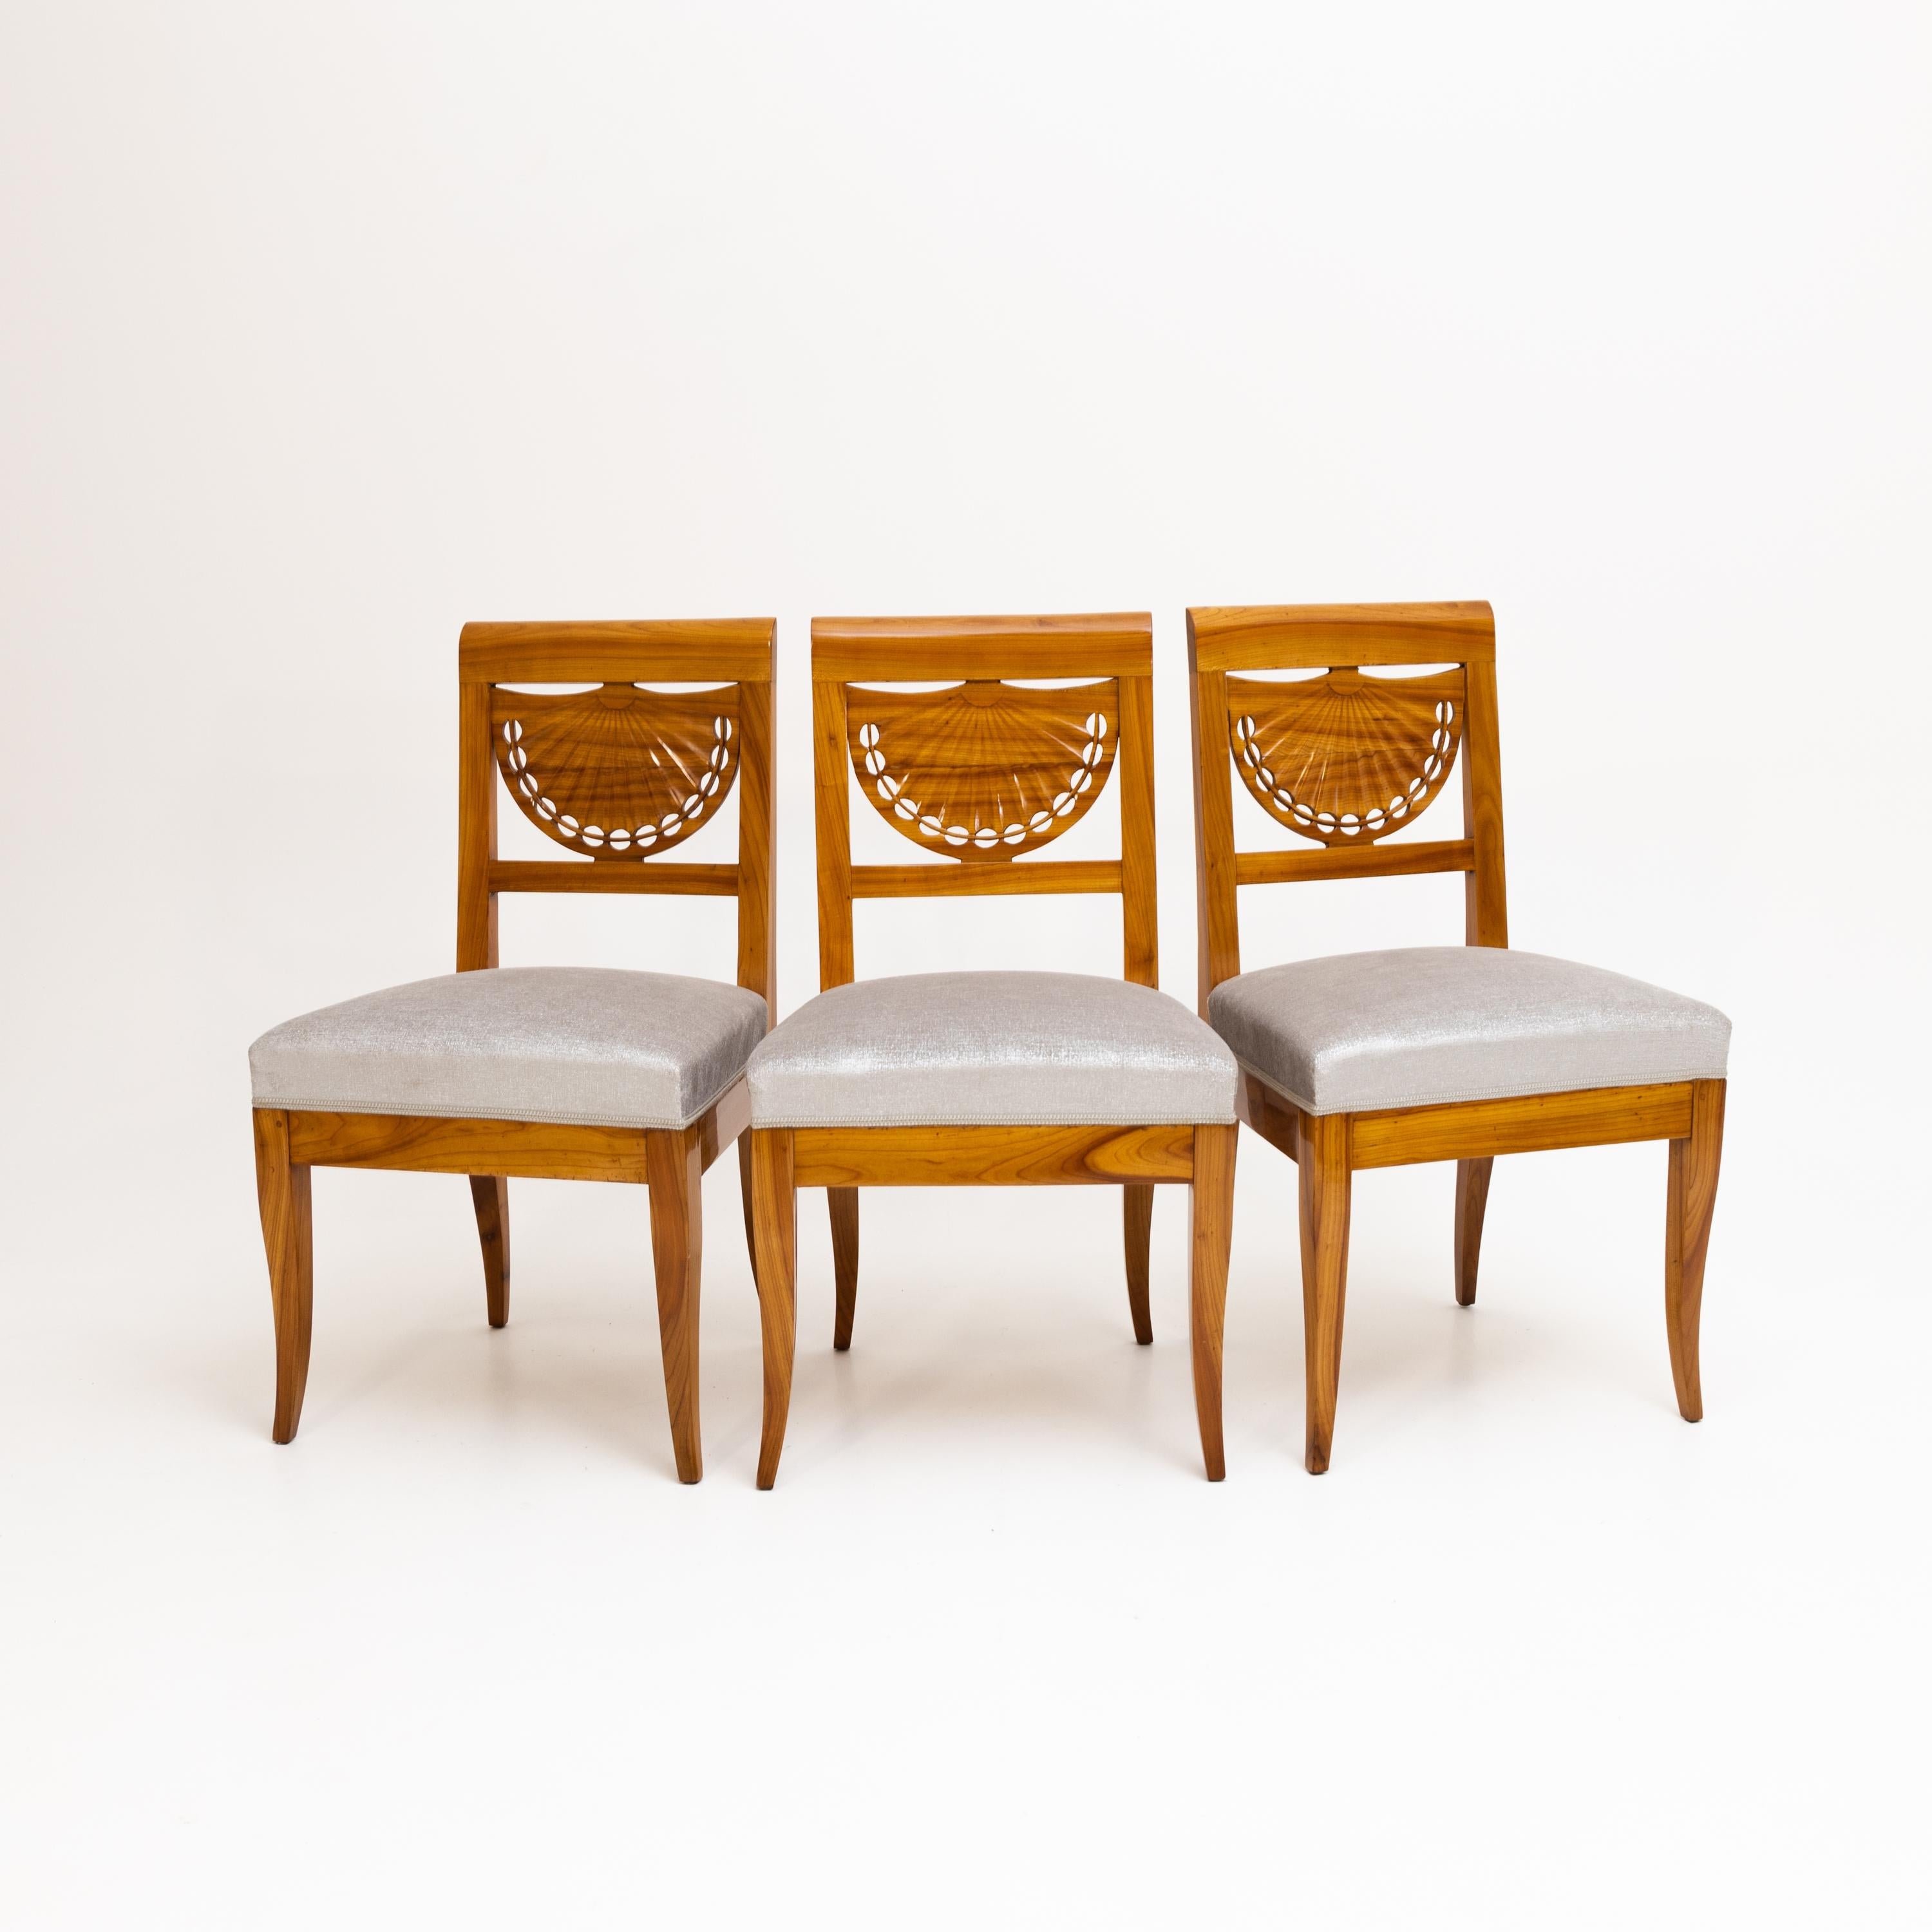 Set of three Biedermeier chairs in cherry wood with fan-shaped backrests and newly upholstered seats.